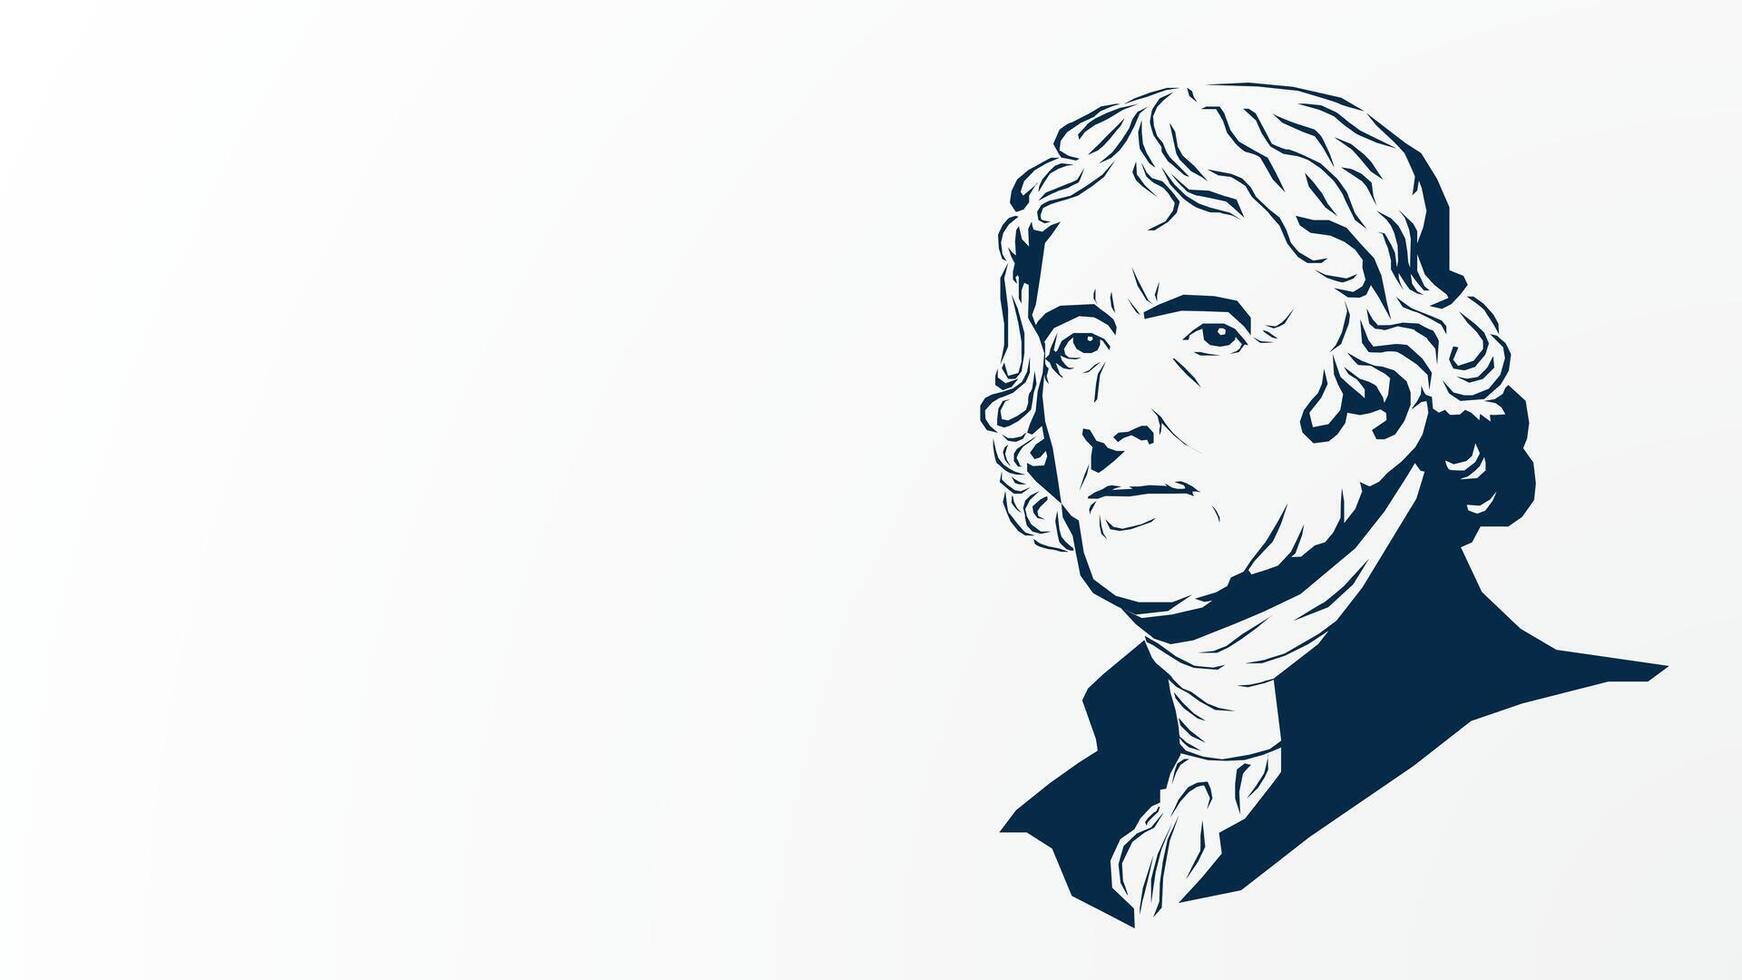 Thomas Jefferson Vector Illustration background, banner, and poster.Vector illustration with blue color, white background and copy space area